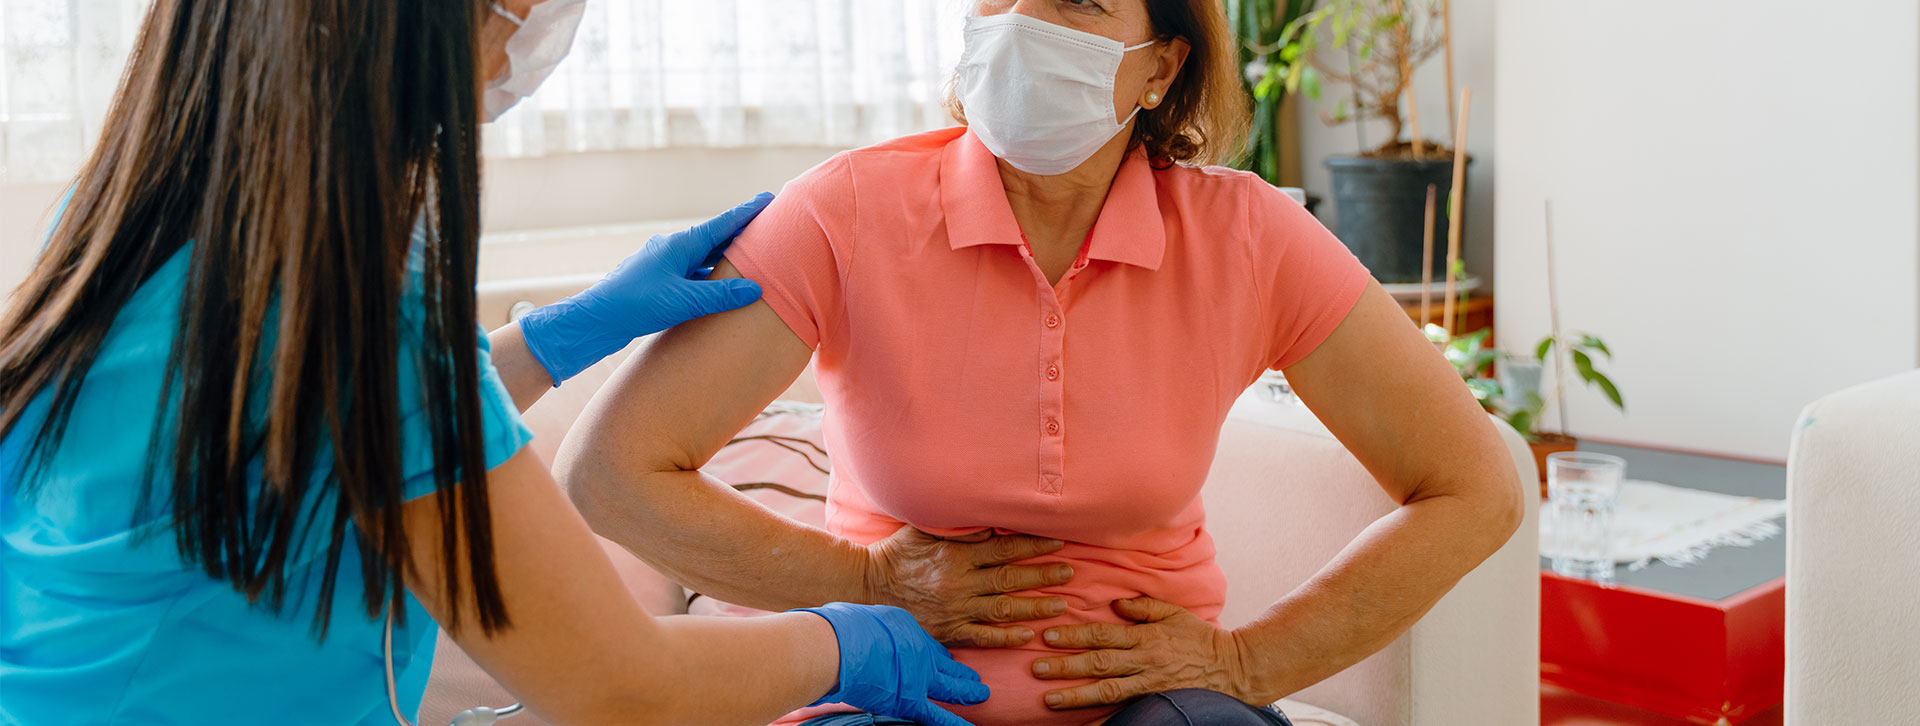 Abdominal pain patient woman having medical exam with doctor.